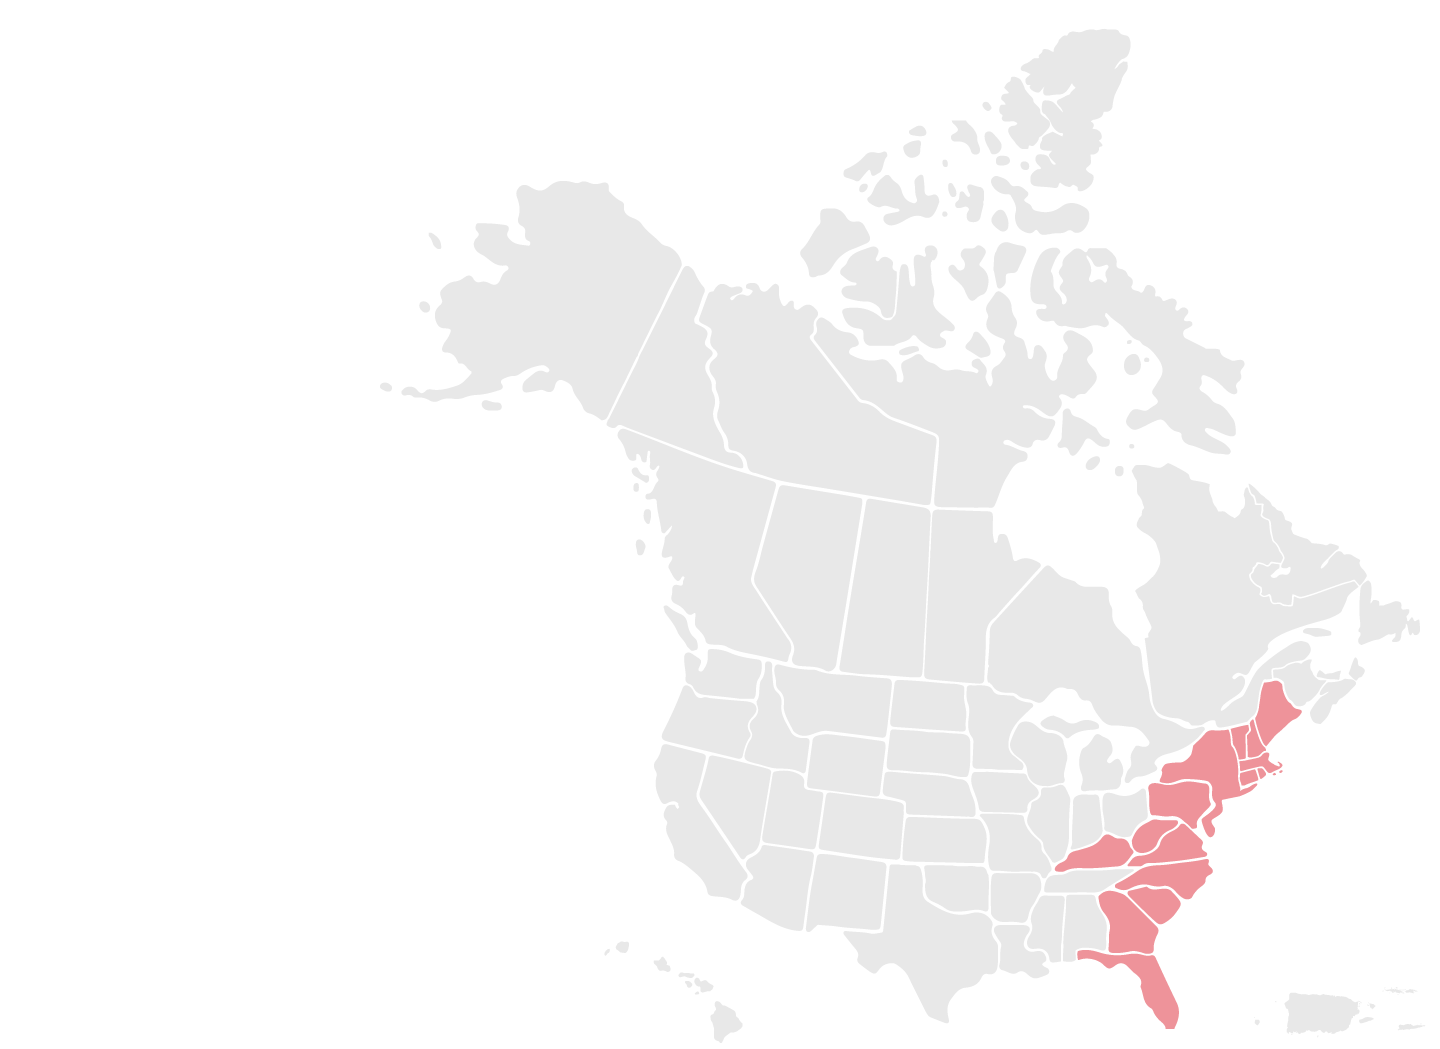 US and Canada map with the eastern US states highlighted in red